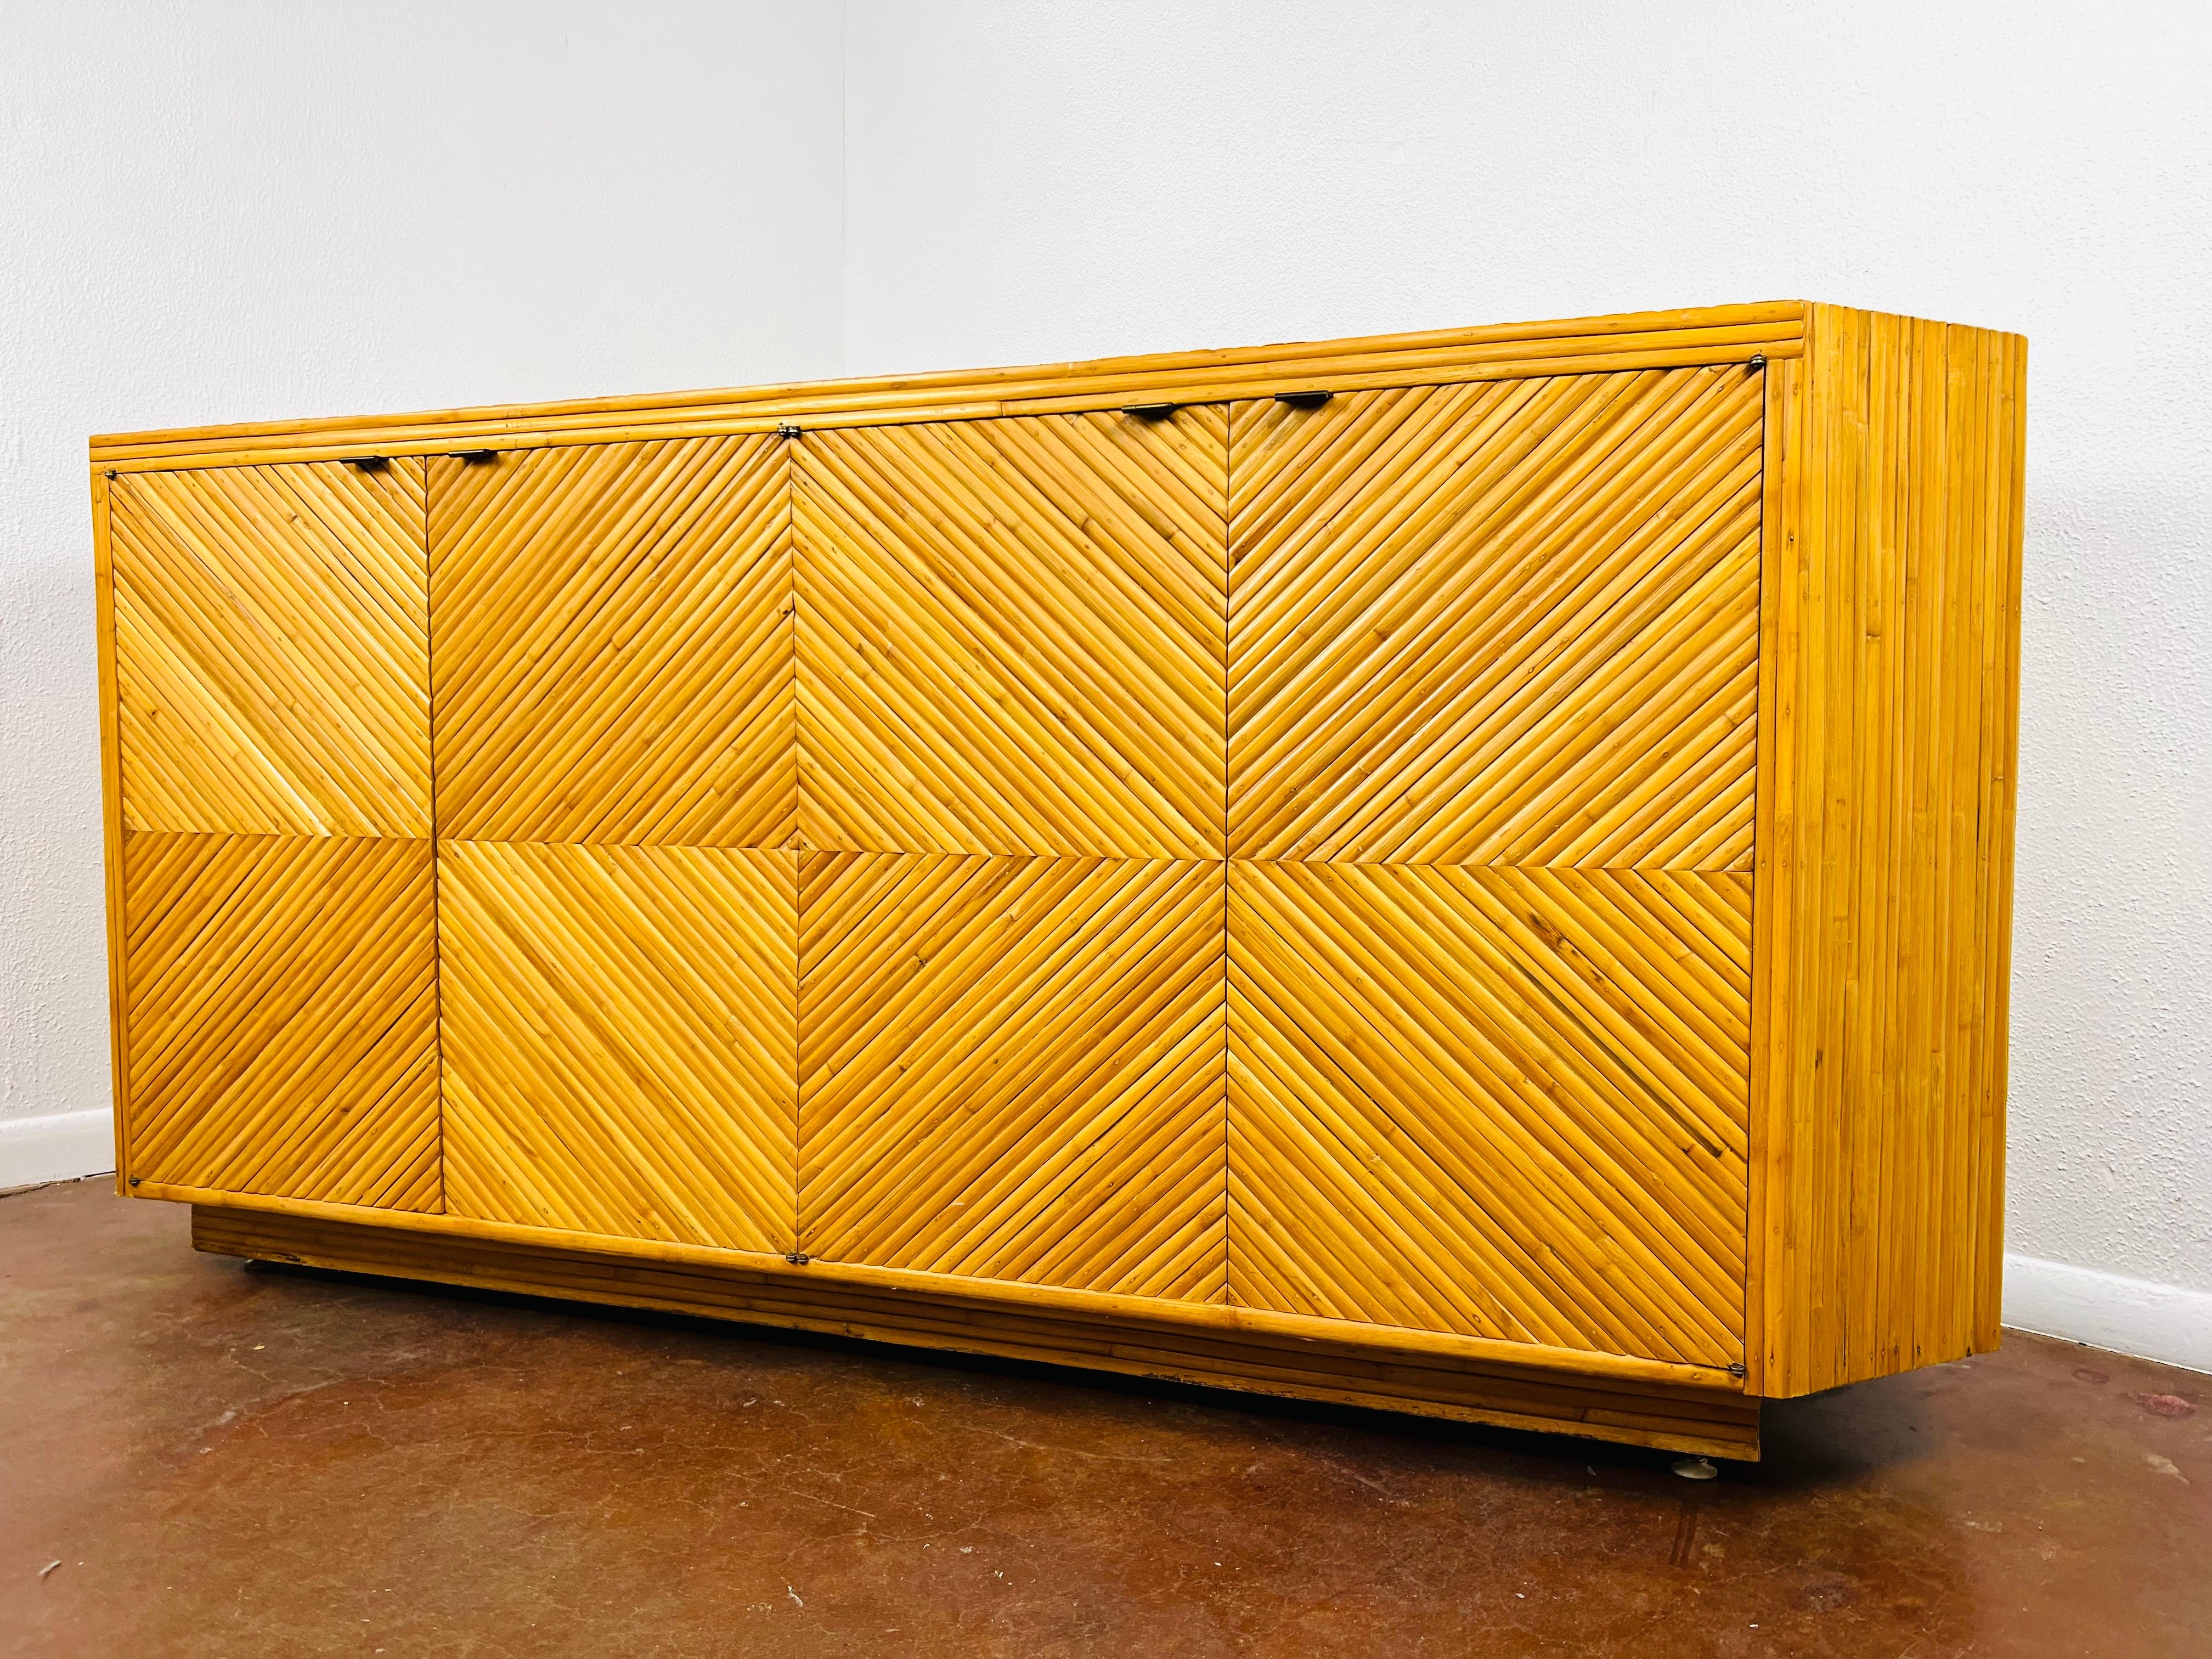 Exceptional split bamboo credenza/sideboard in excellent vintage condition with some minor age appropriate wear and tasteful patina. Diagonally applied split bamboo veneer over solid hardwood case construction. The cabinet is finished completely,